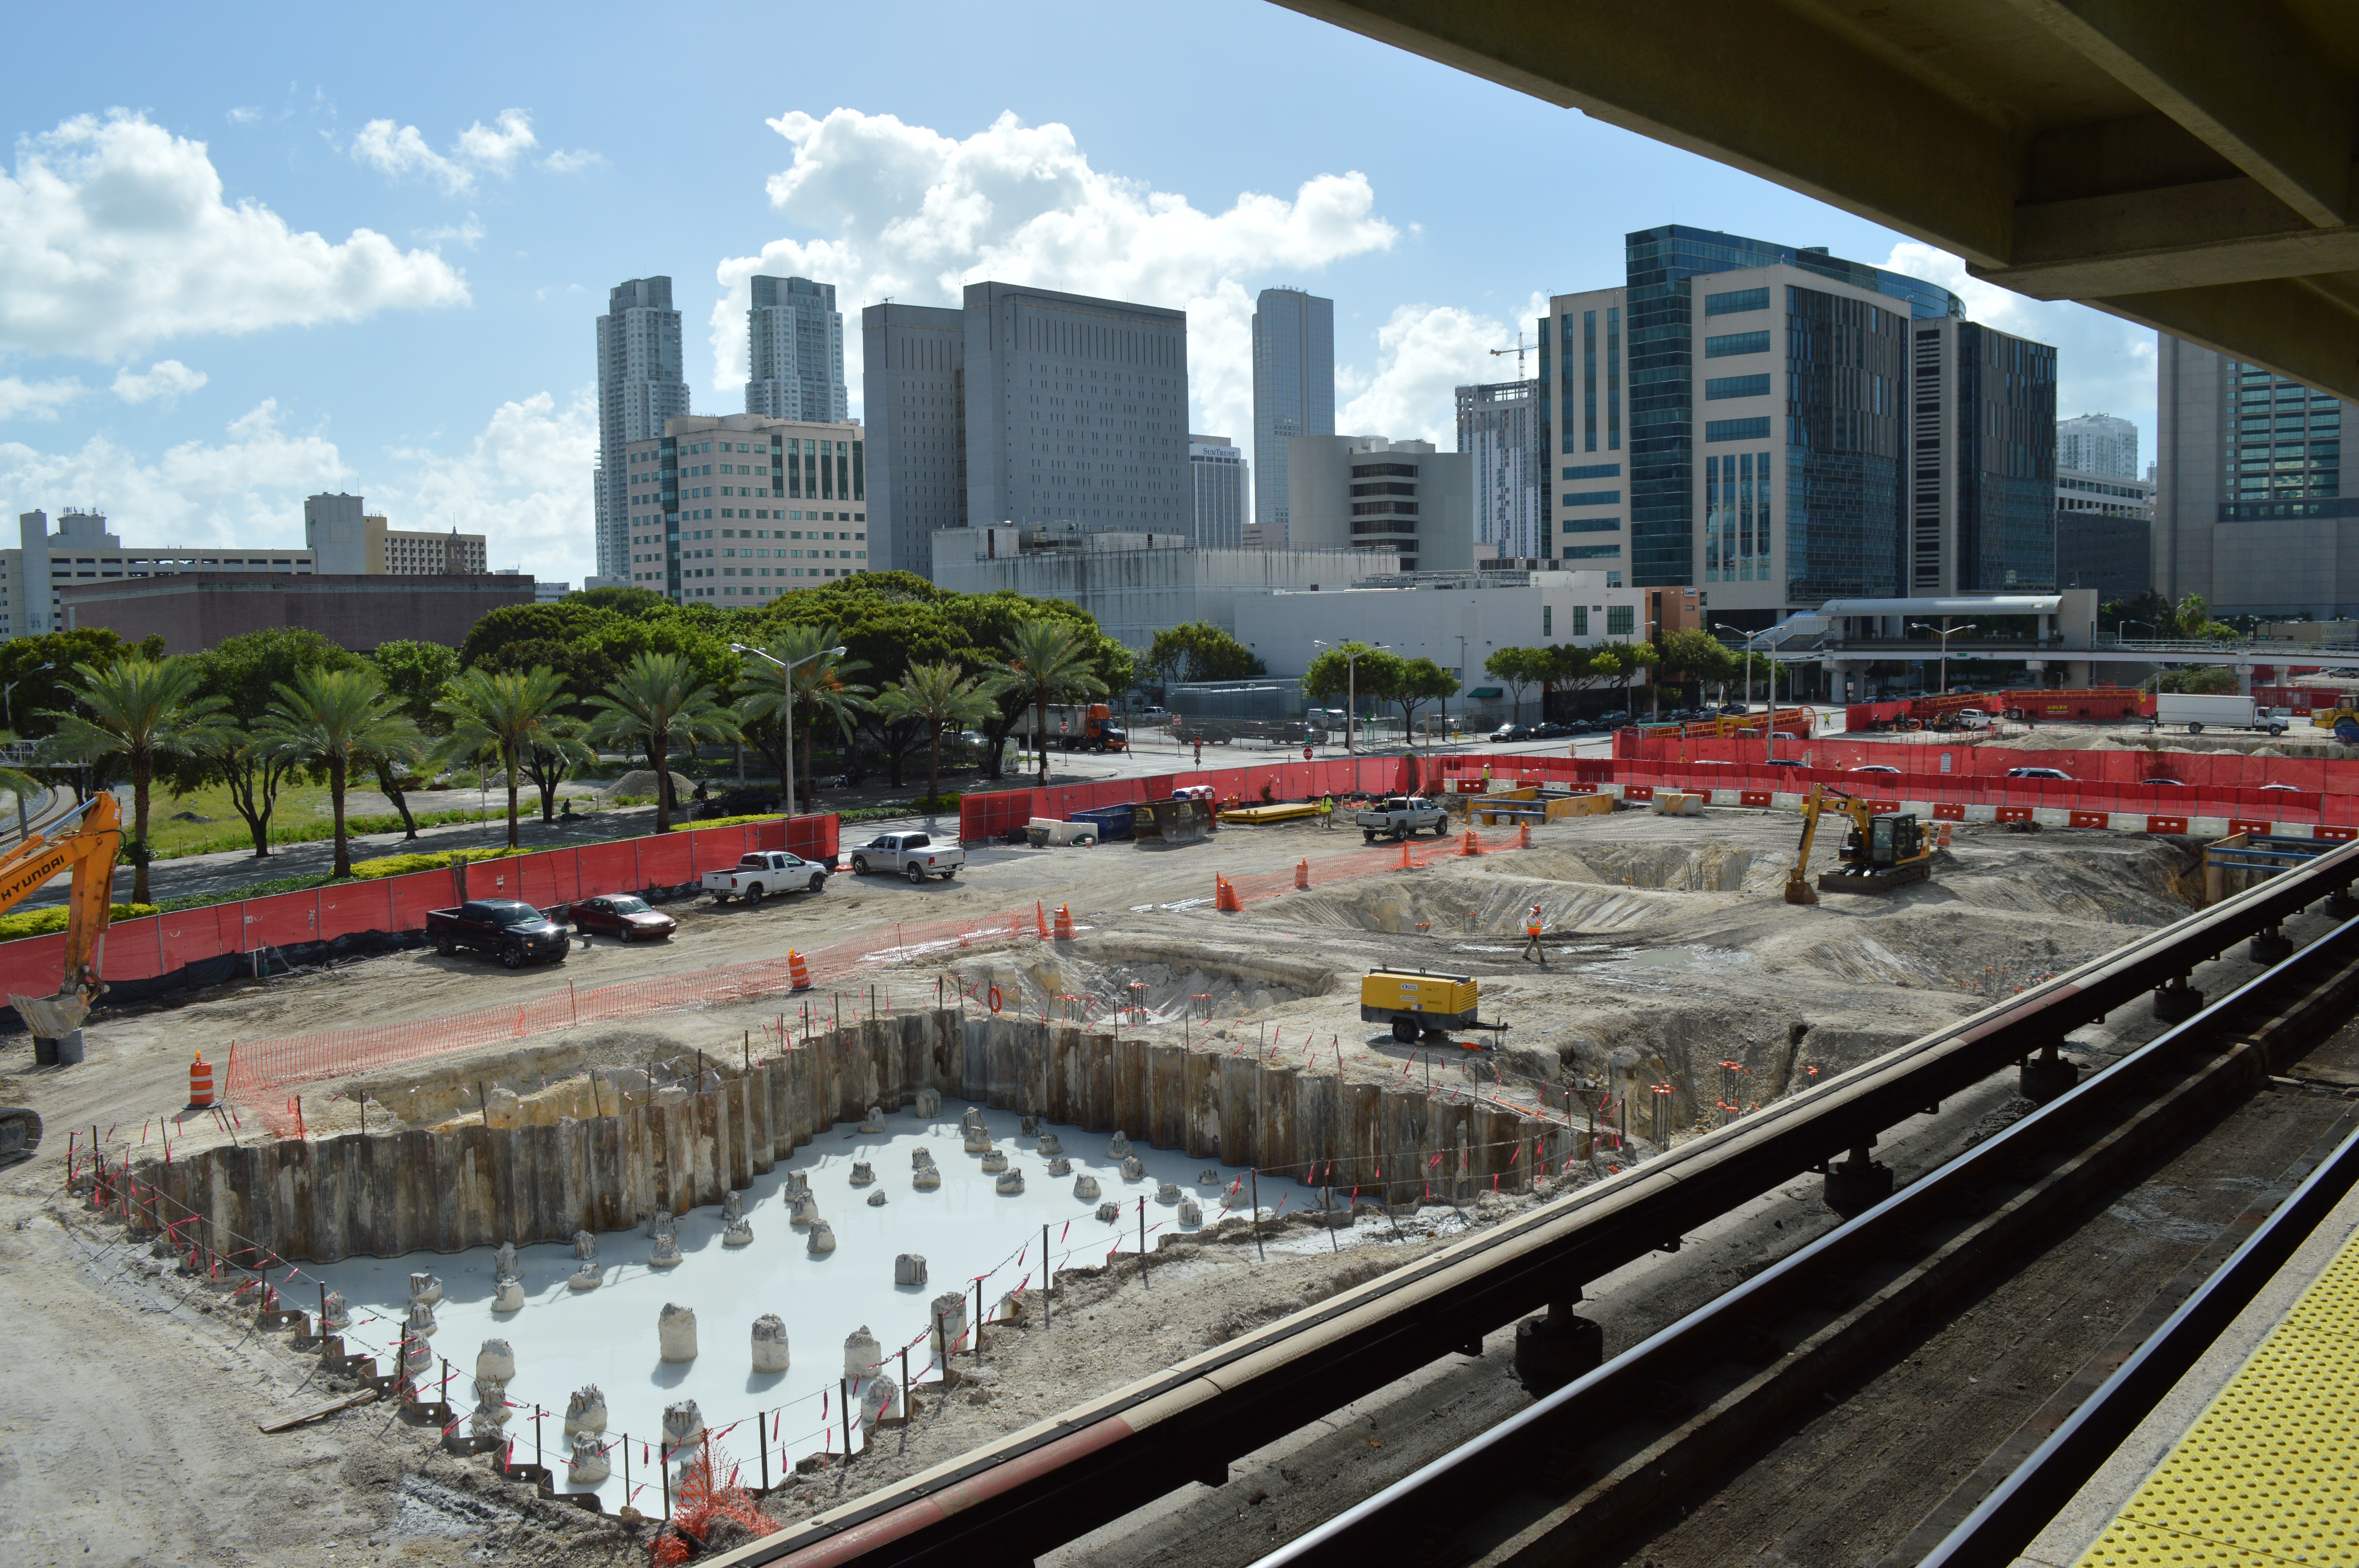 The MiamiCentral construction site as of October 2015